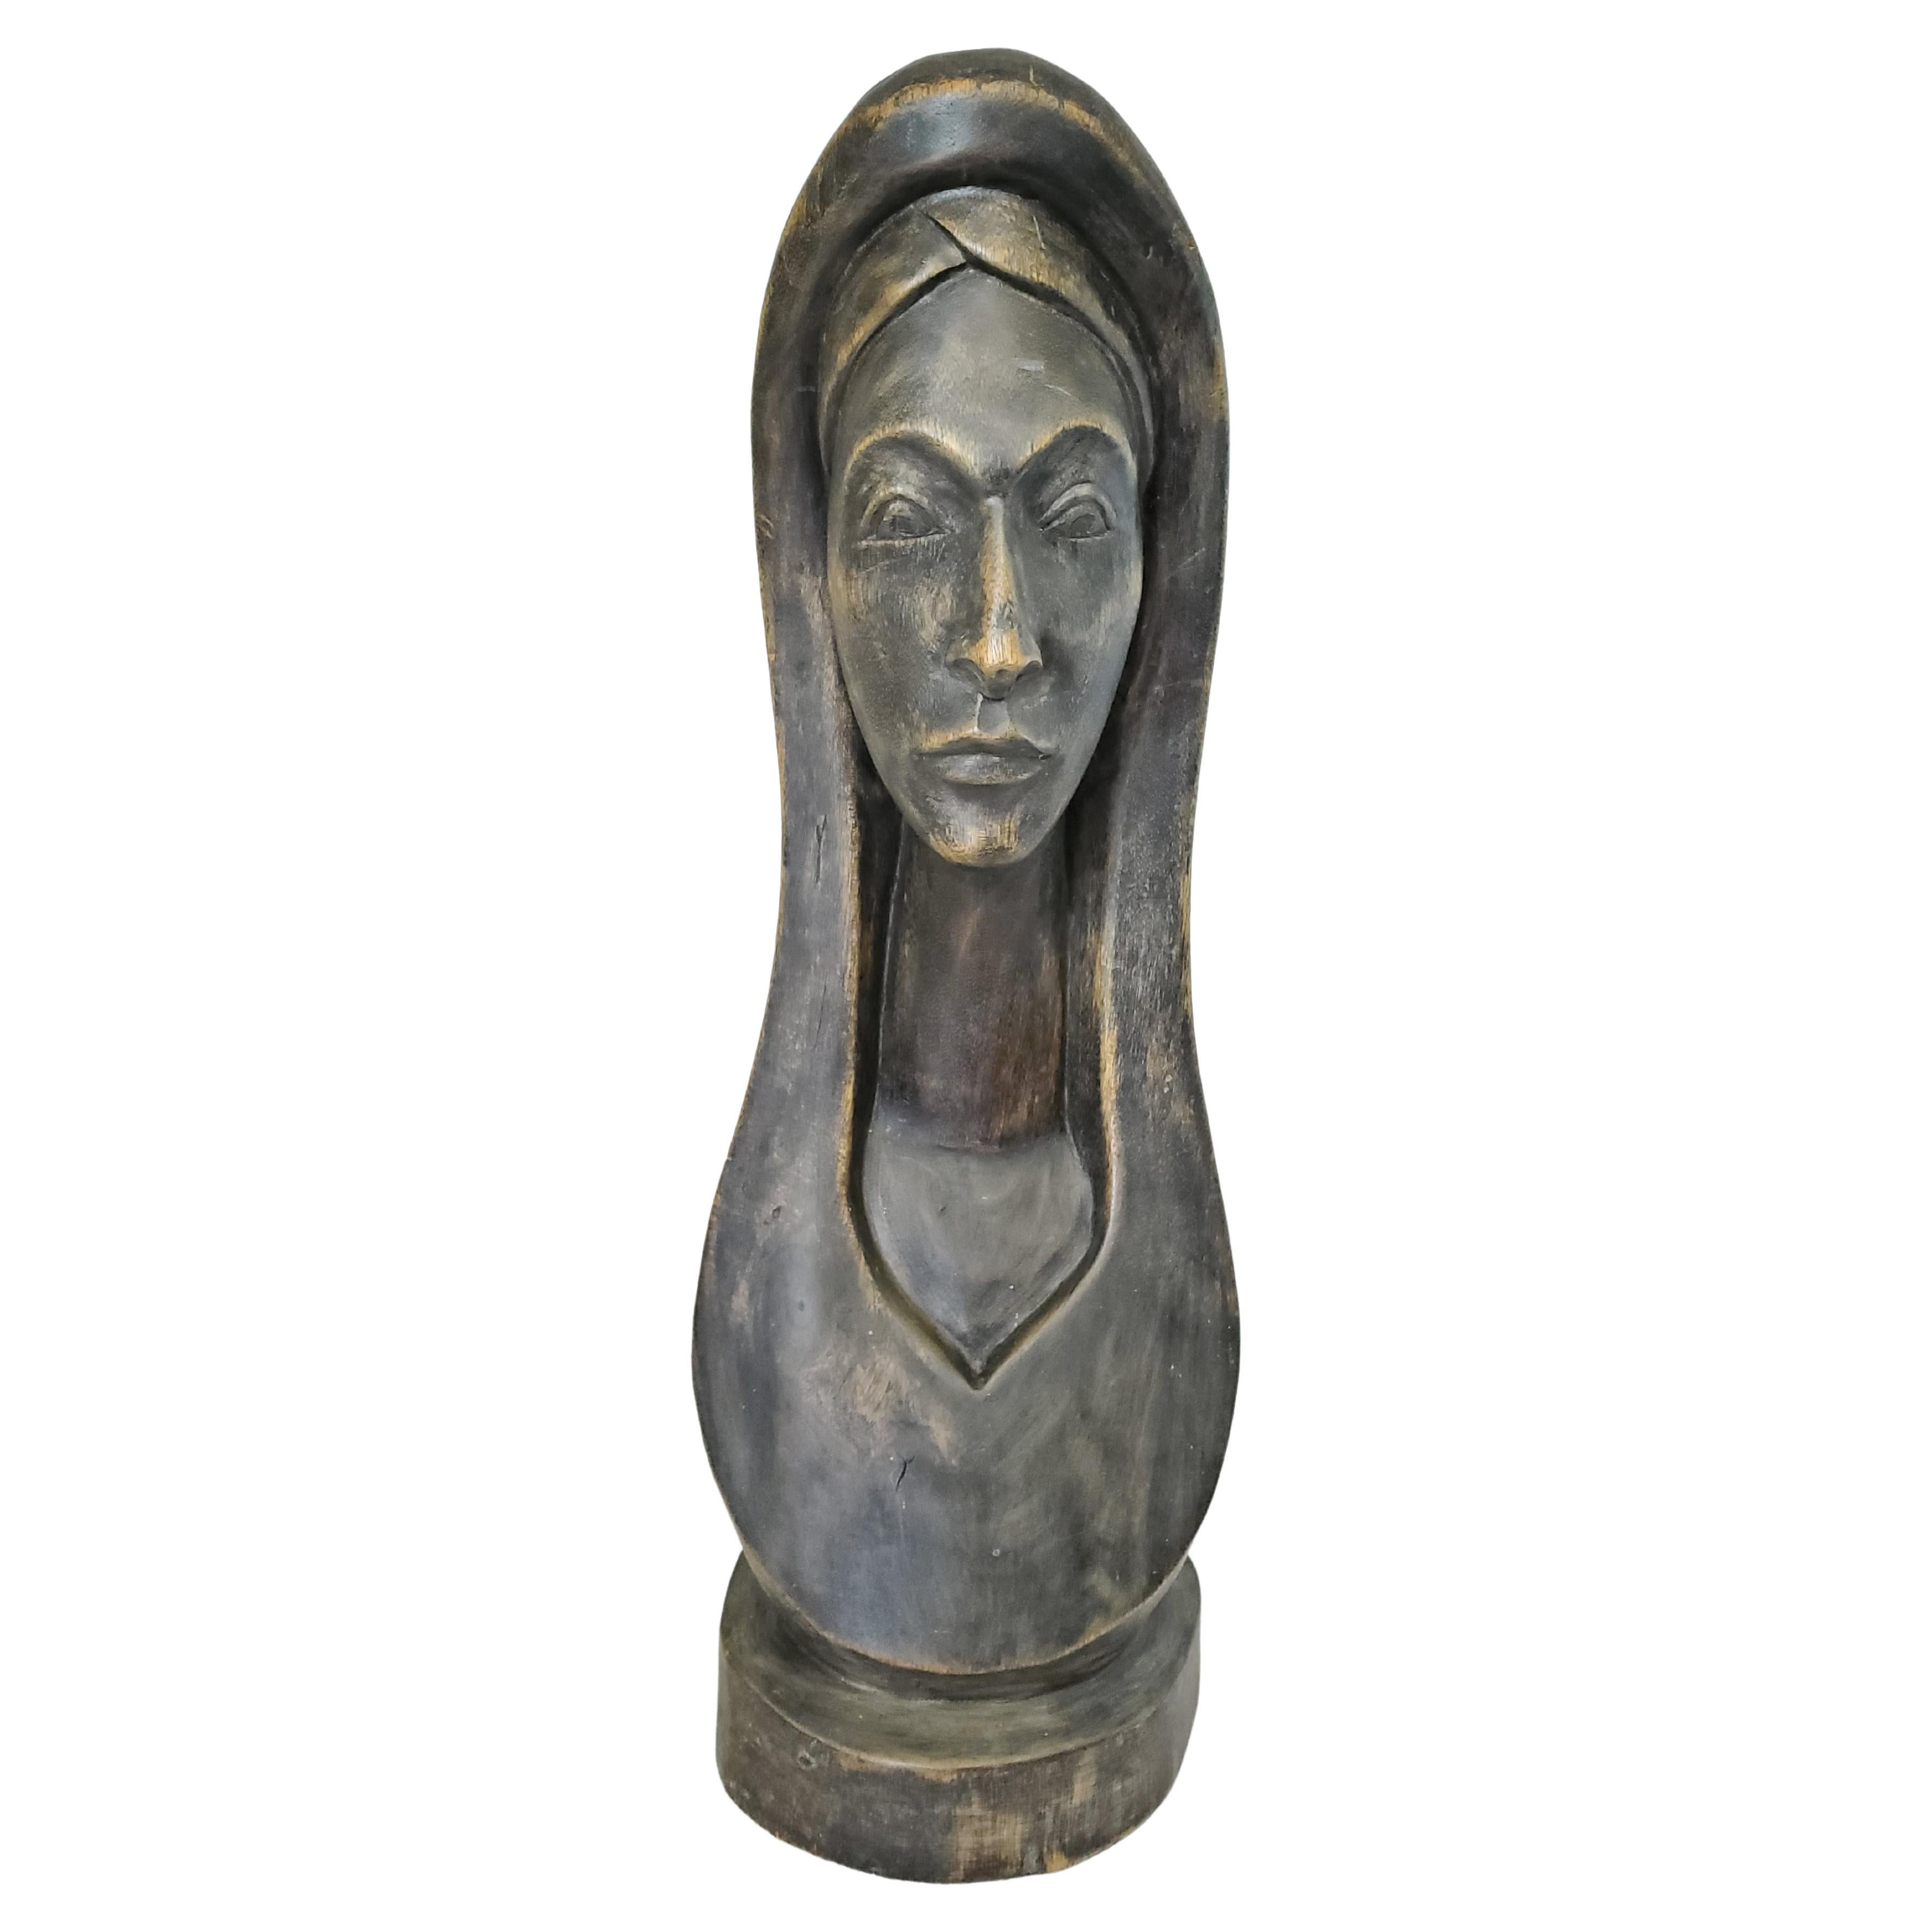 This bronzed wood sculpture or bust is beautifully carved in a minimalist style that evokes a sense of serenity. Interestingly, this wooden sculpture comes from Vaudreuil-Dorion, Quebec -- formerly a 17th century French Catholic settlement in what